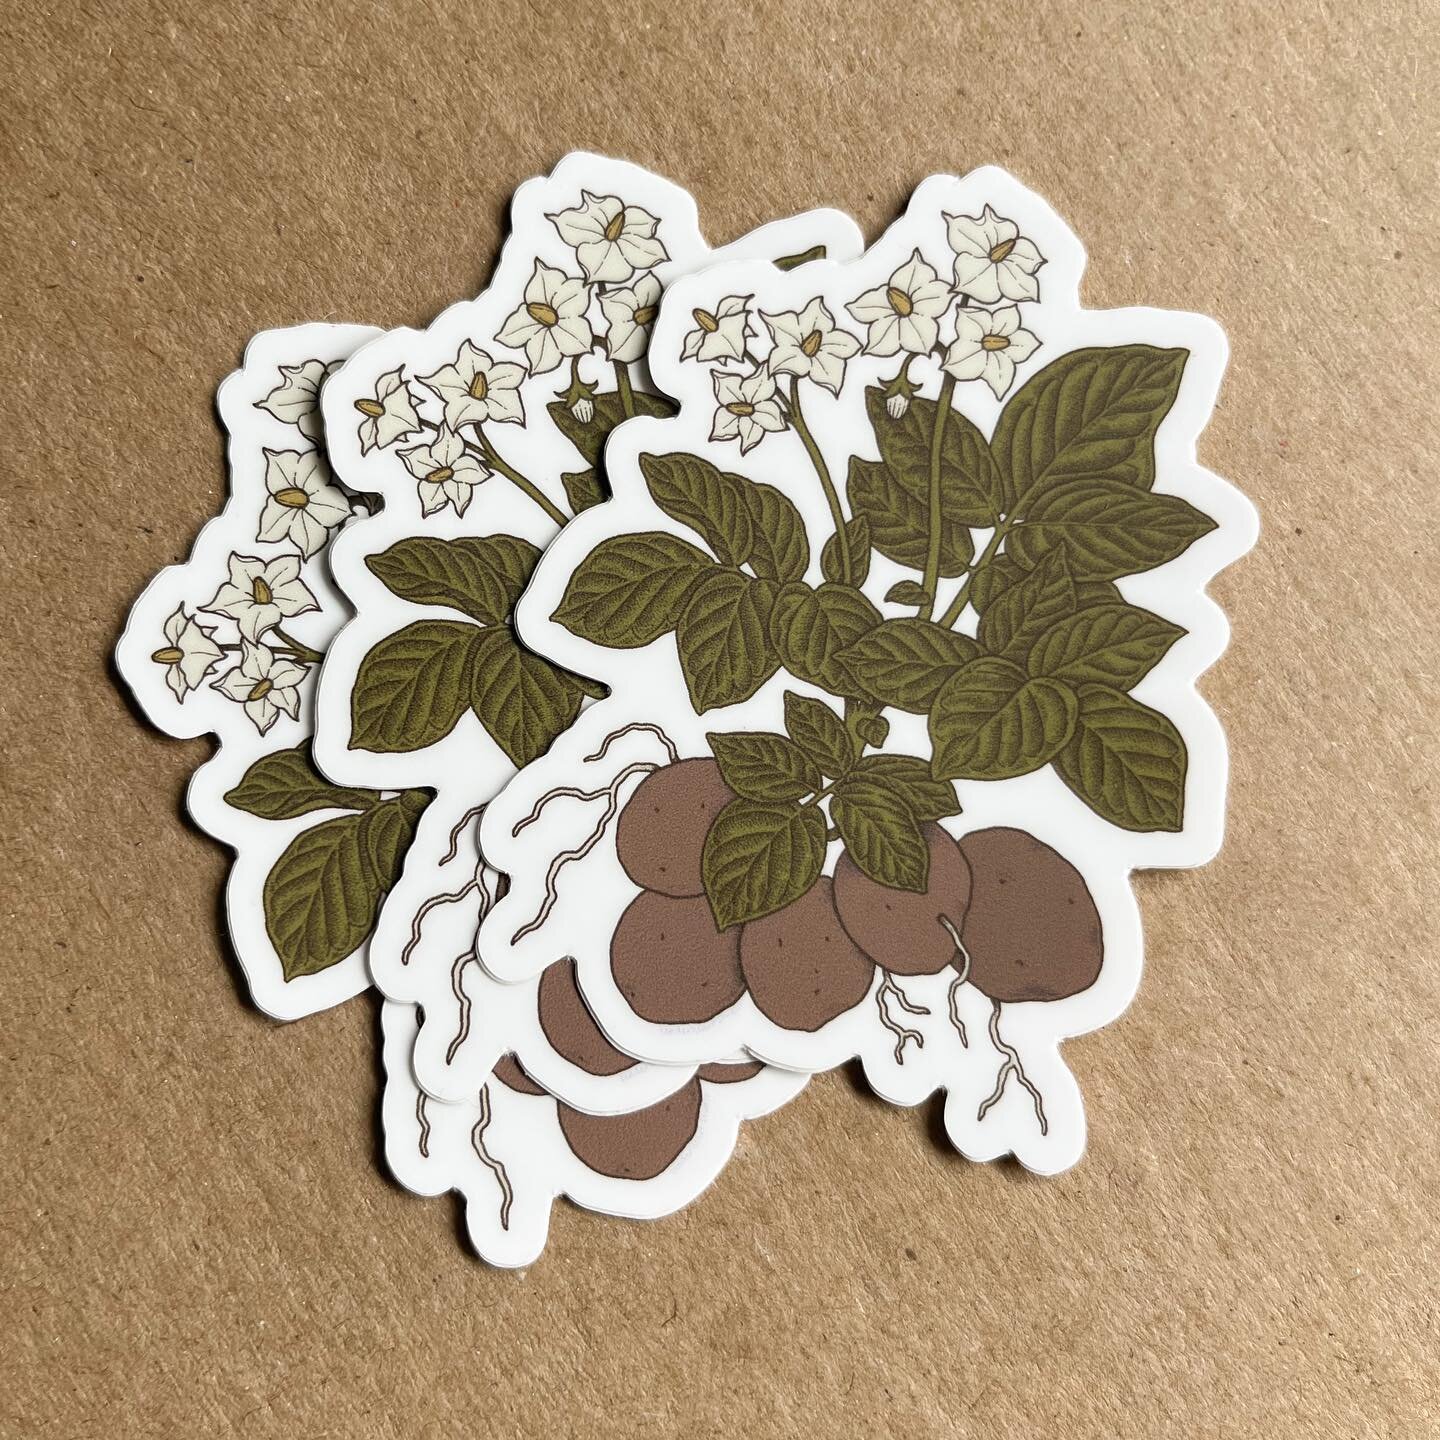 🚨Potato stickers and prints are here! 
Your favorite tuber, a symbol of class solidarity, and proof of magic in the mundane.

Are you unconvinced that potatoes deserve this kind of respect? Pick up a copy of the second Magic in the Mundane zine to r